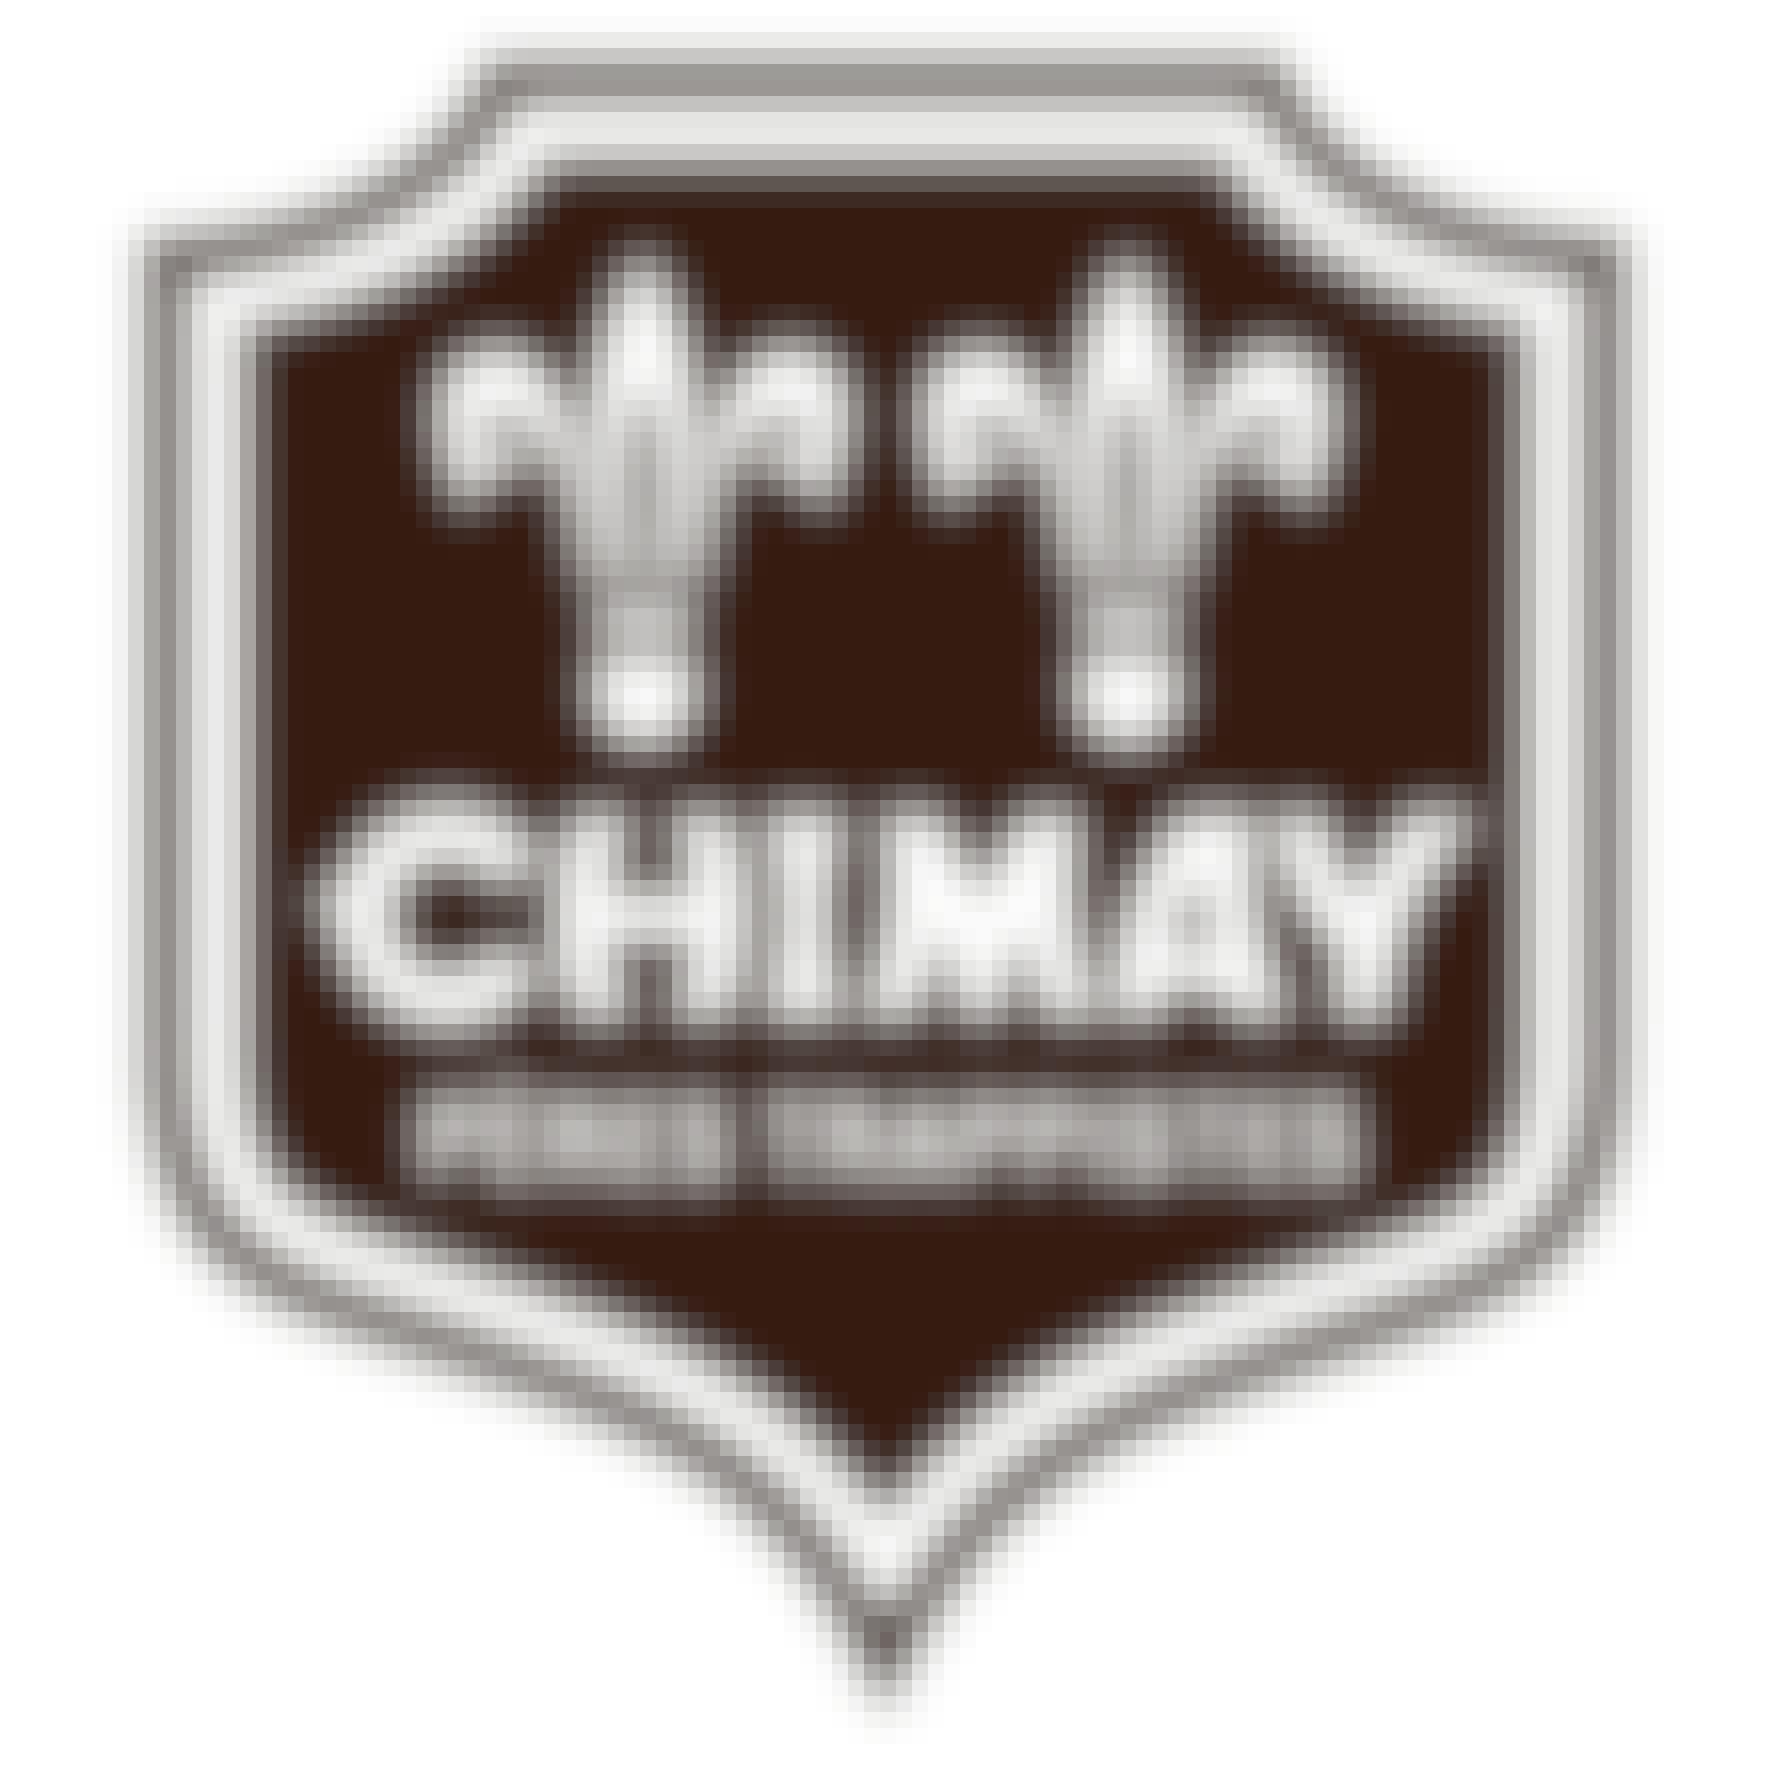 Chimay Grande Reserve Trappistes Strong Brown Ale 16 oz.